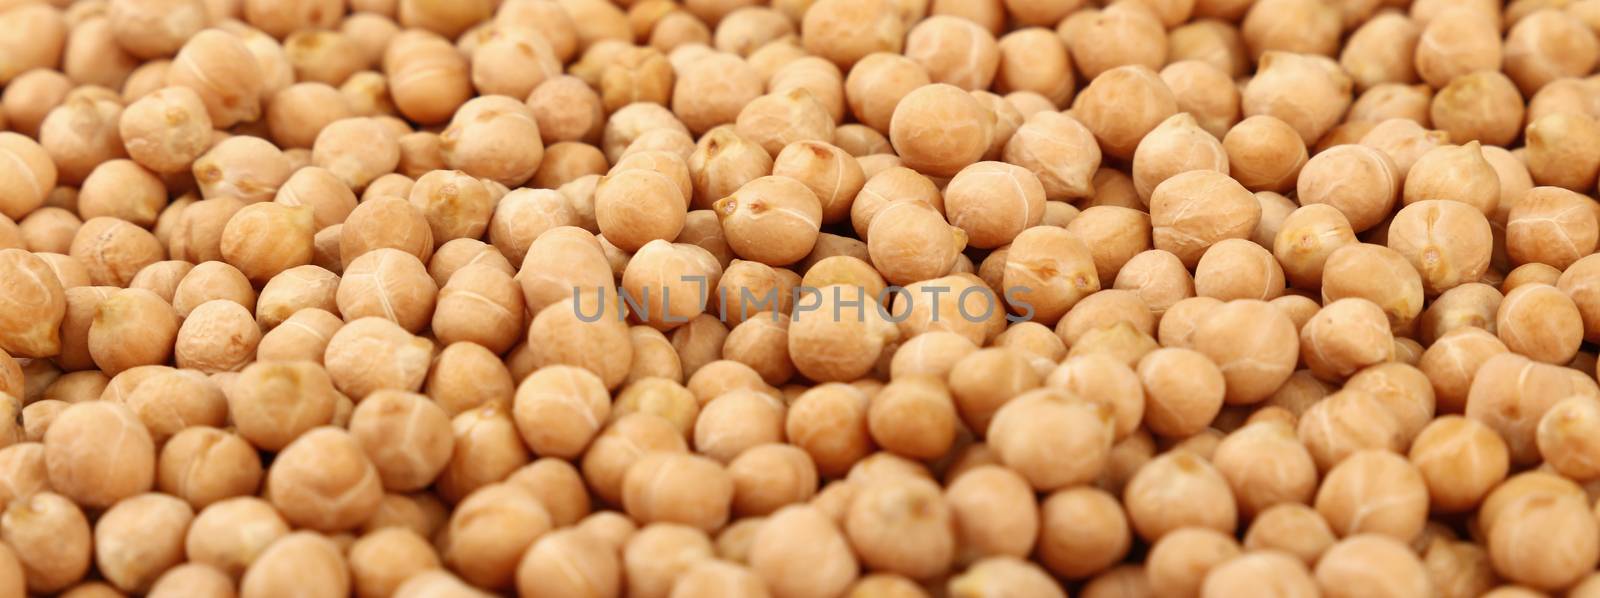 Dried chickpea beans close up background by BreakingTheWalls